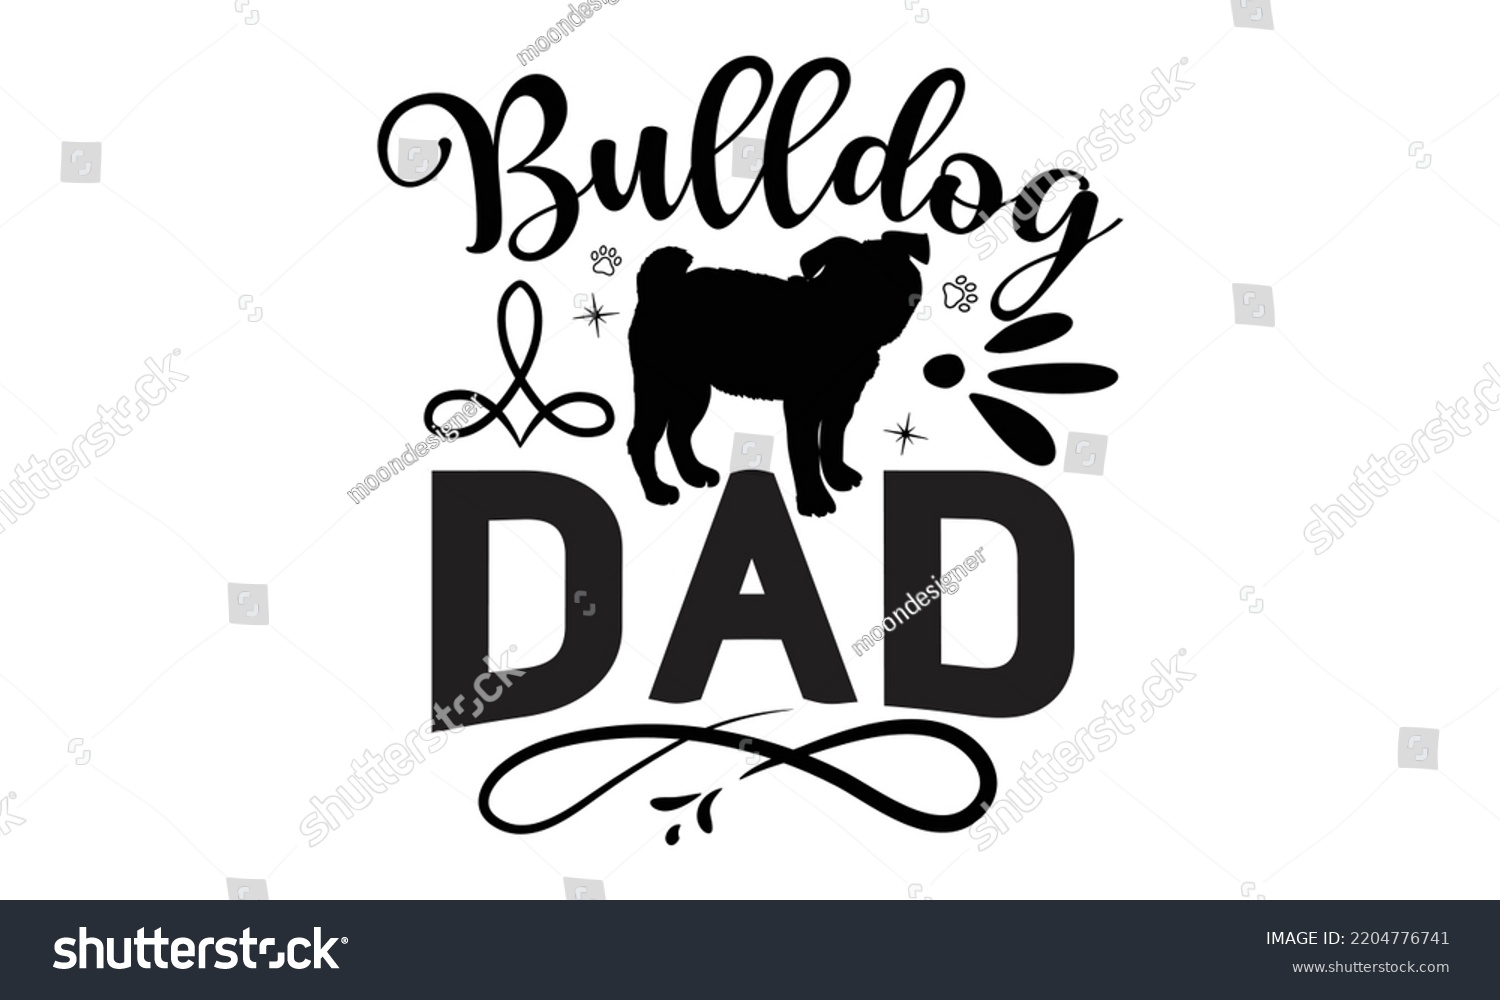 SVG of Bulldog dad - Bullodog T-shirt and SVG Design,  Dog lover t shirt design gift for women, typography design, can you download this Design, svg Files for Cutting and Silhouette EPS, 10 svg